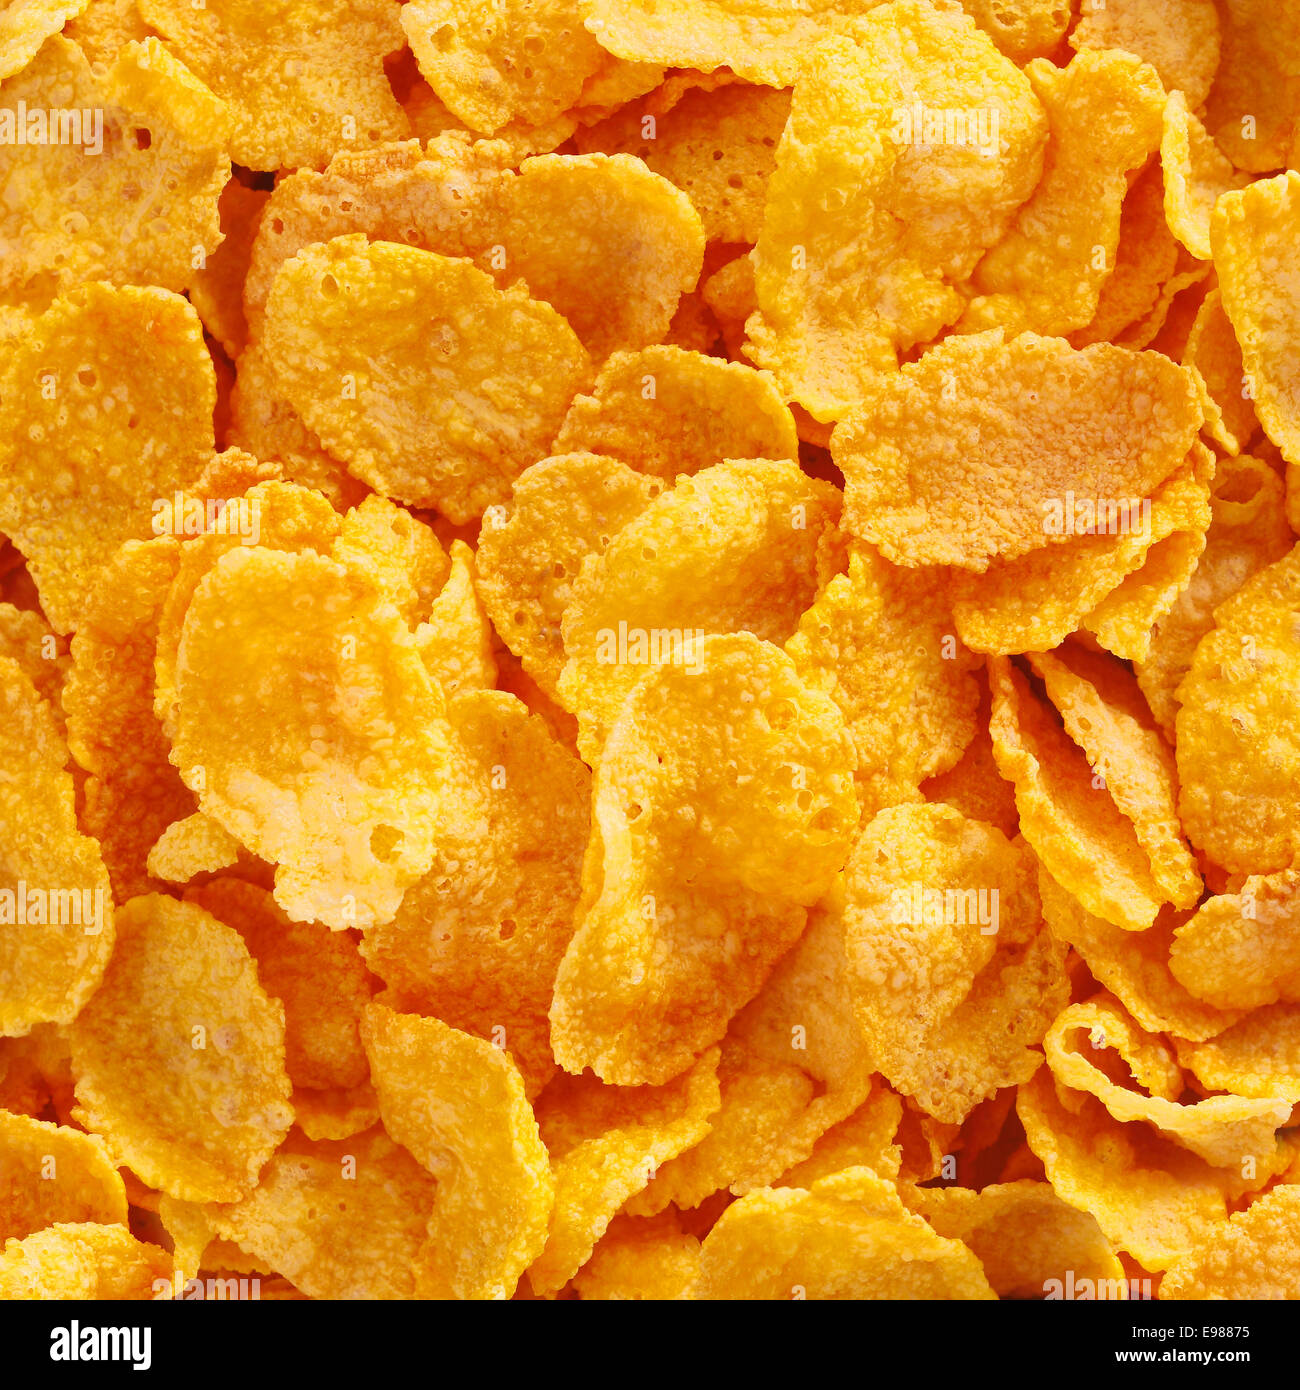 Close up view of corn flake cereal, a healthy and nutritious breakfast food Stock Photo